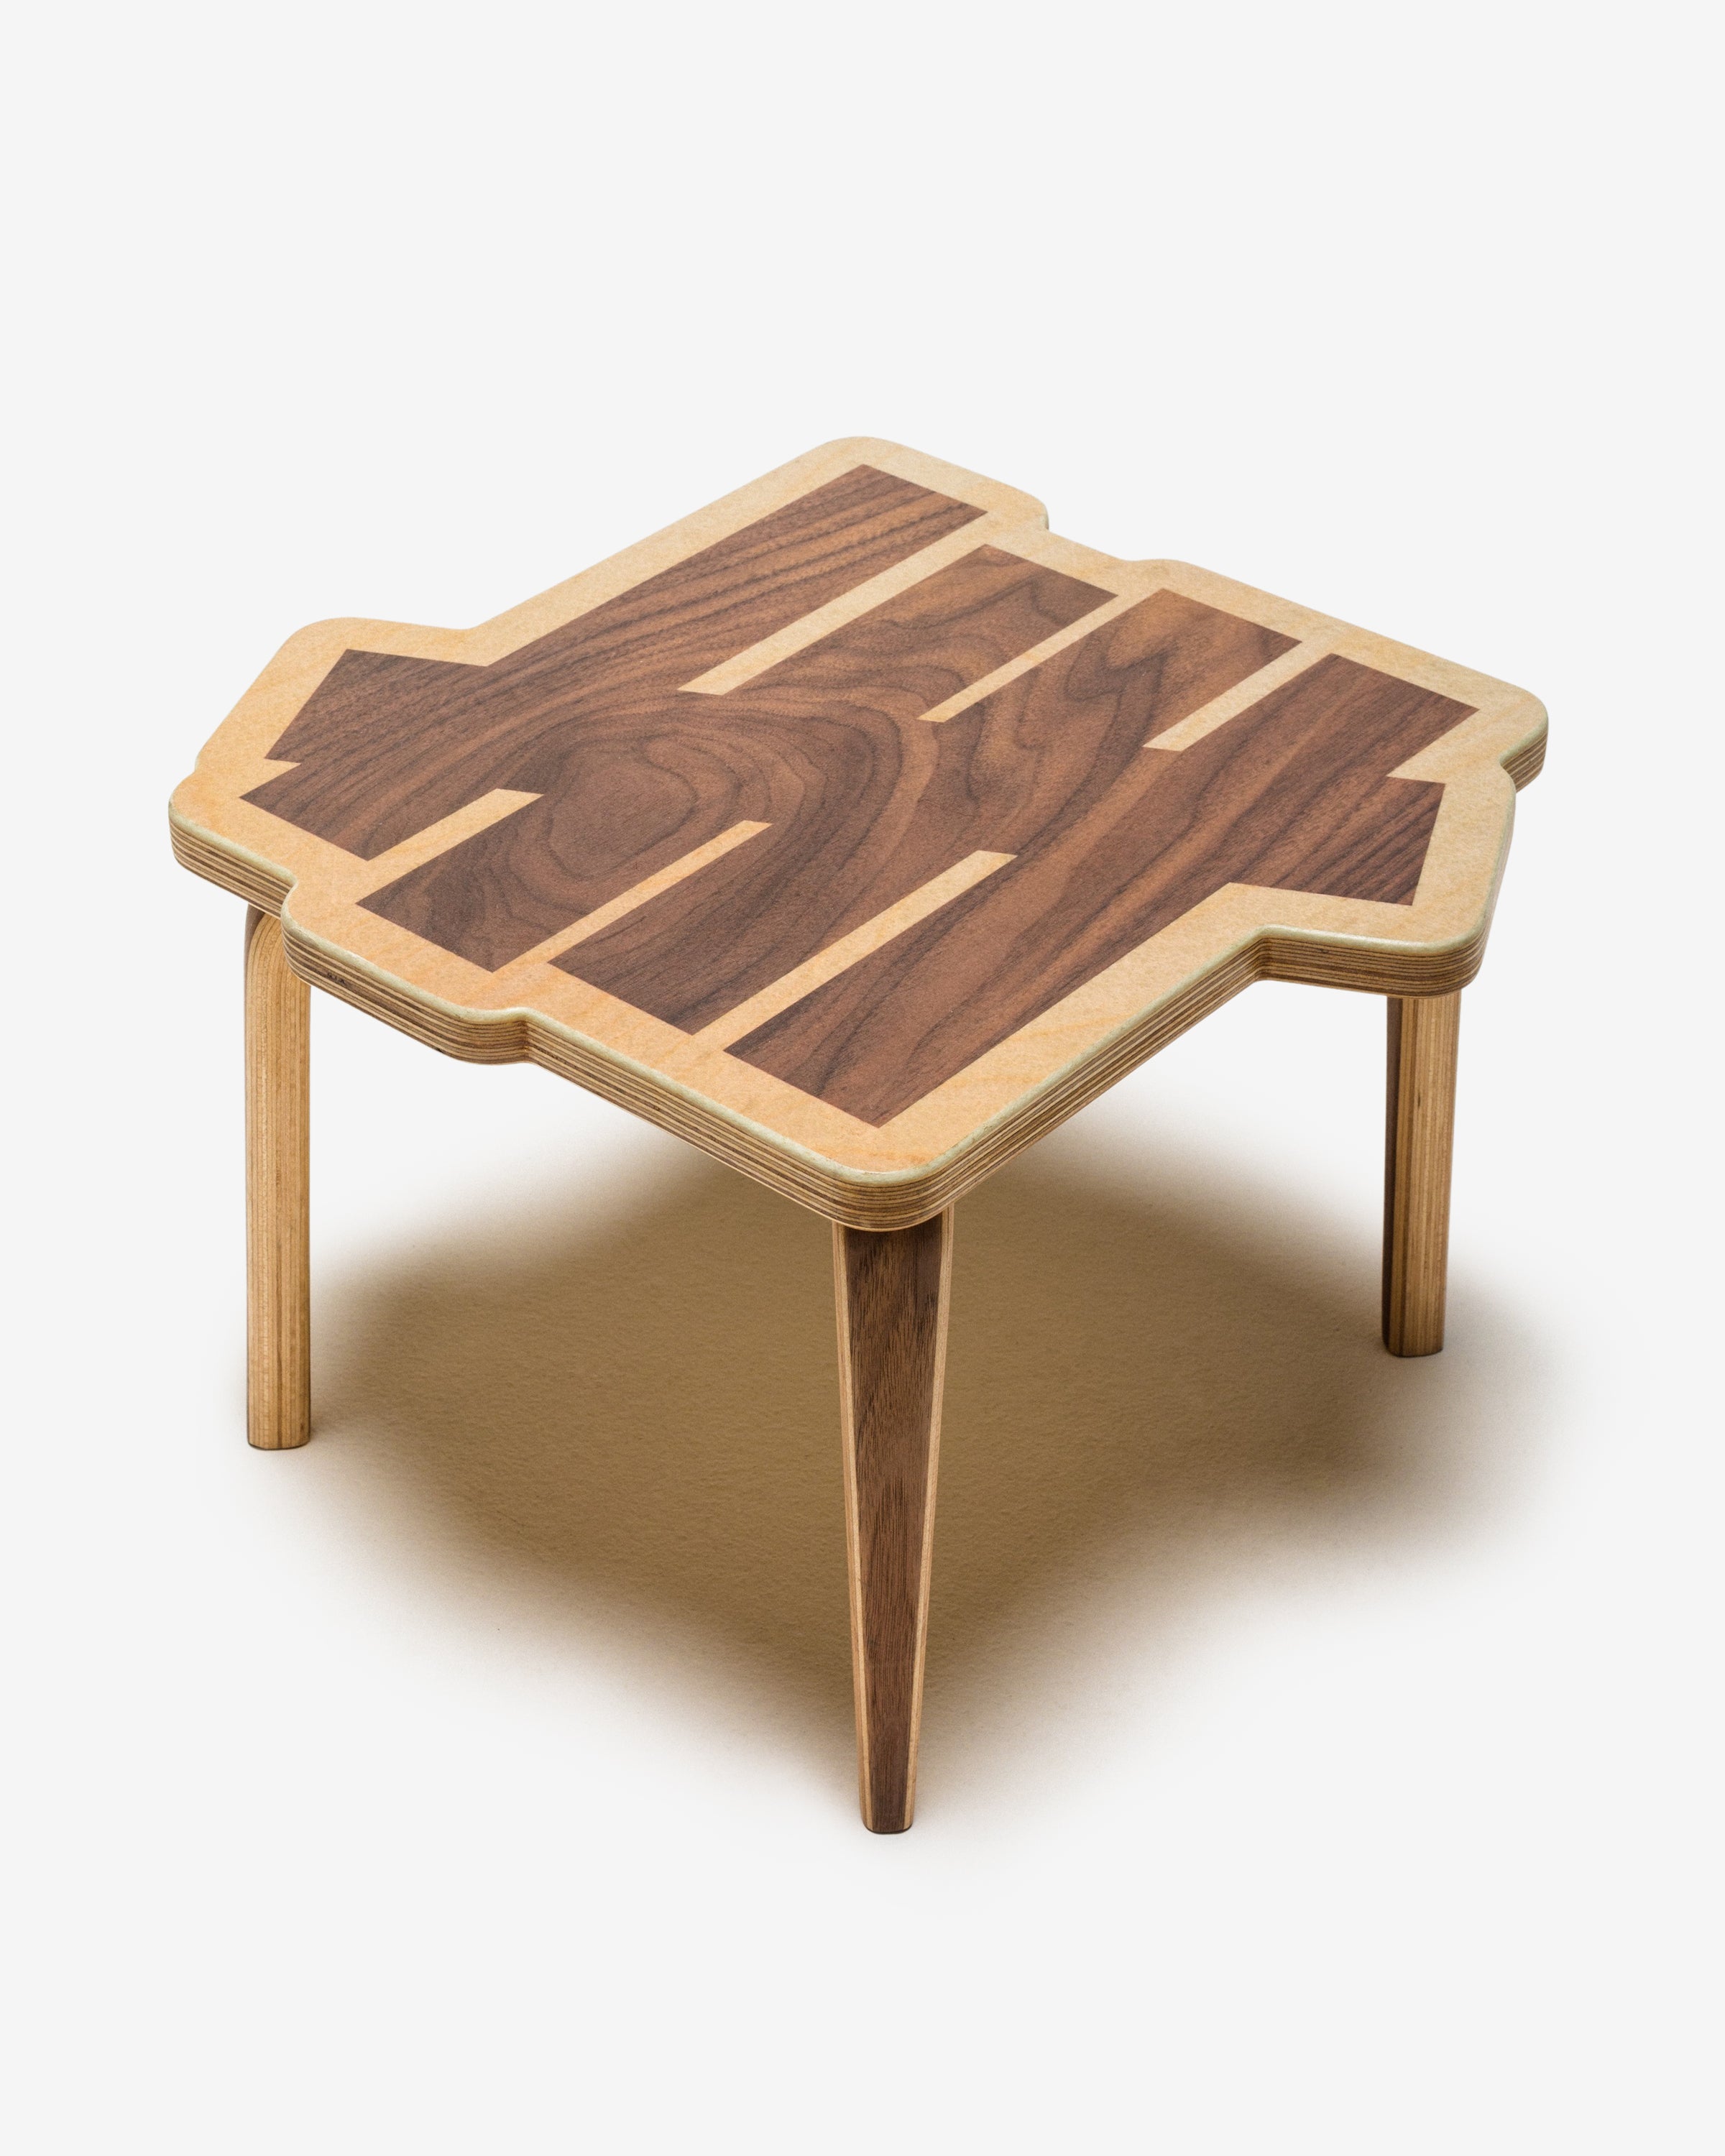 UNDEFEATED X MODERNICA SIDE TABLE - NATURAL/ WALNUT